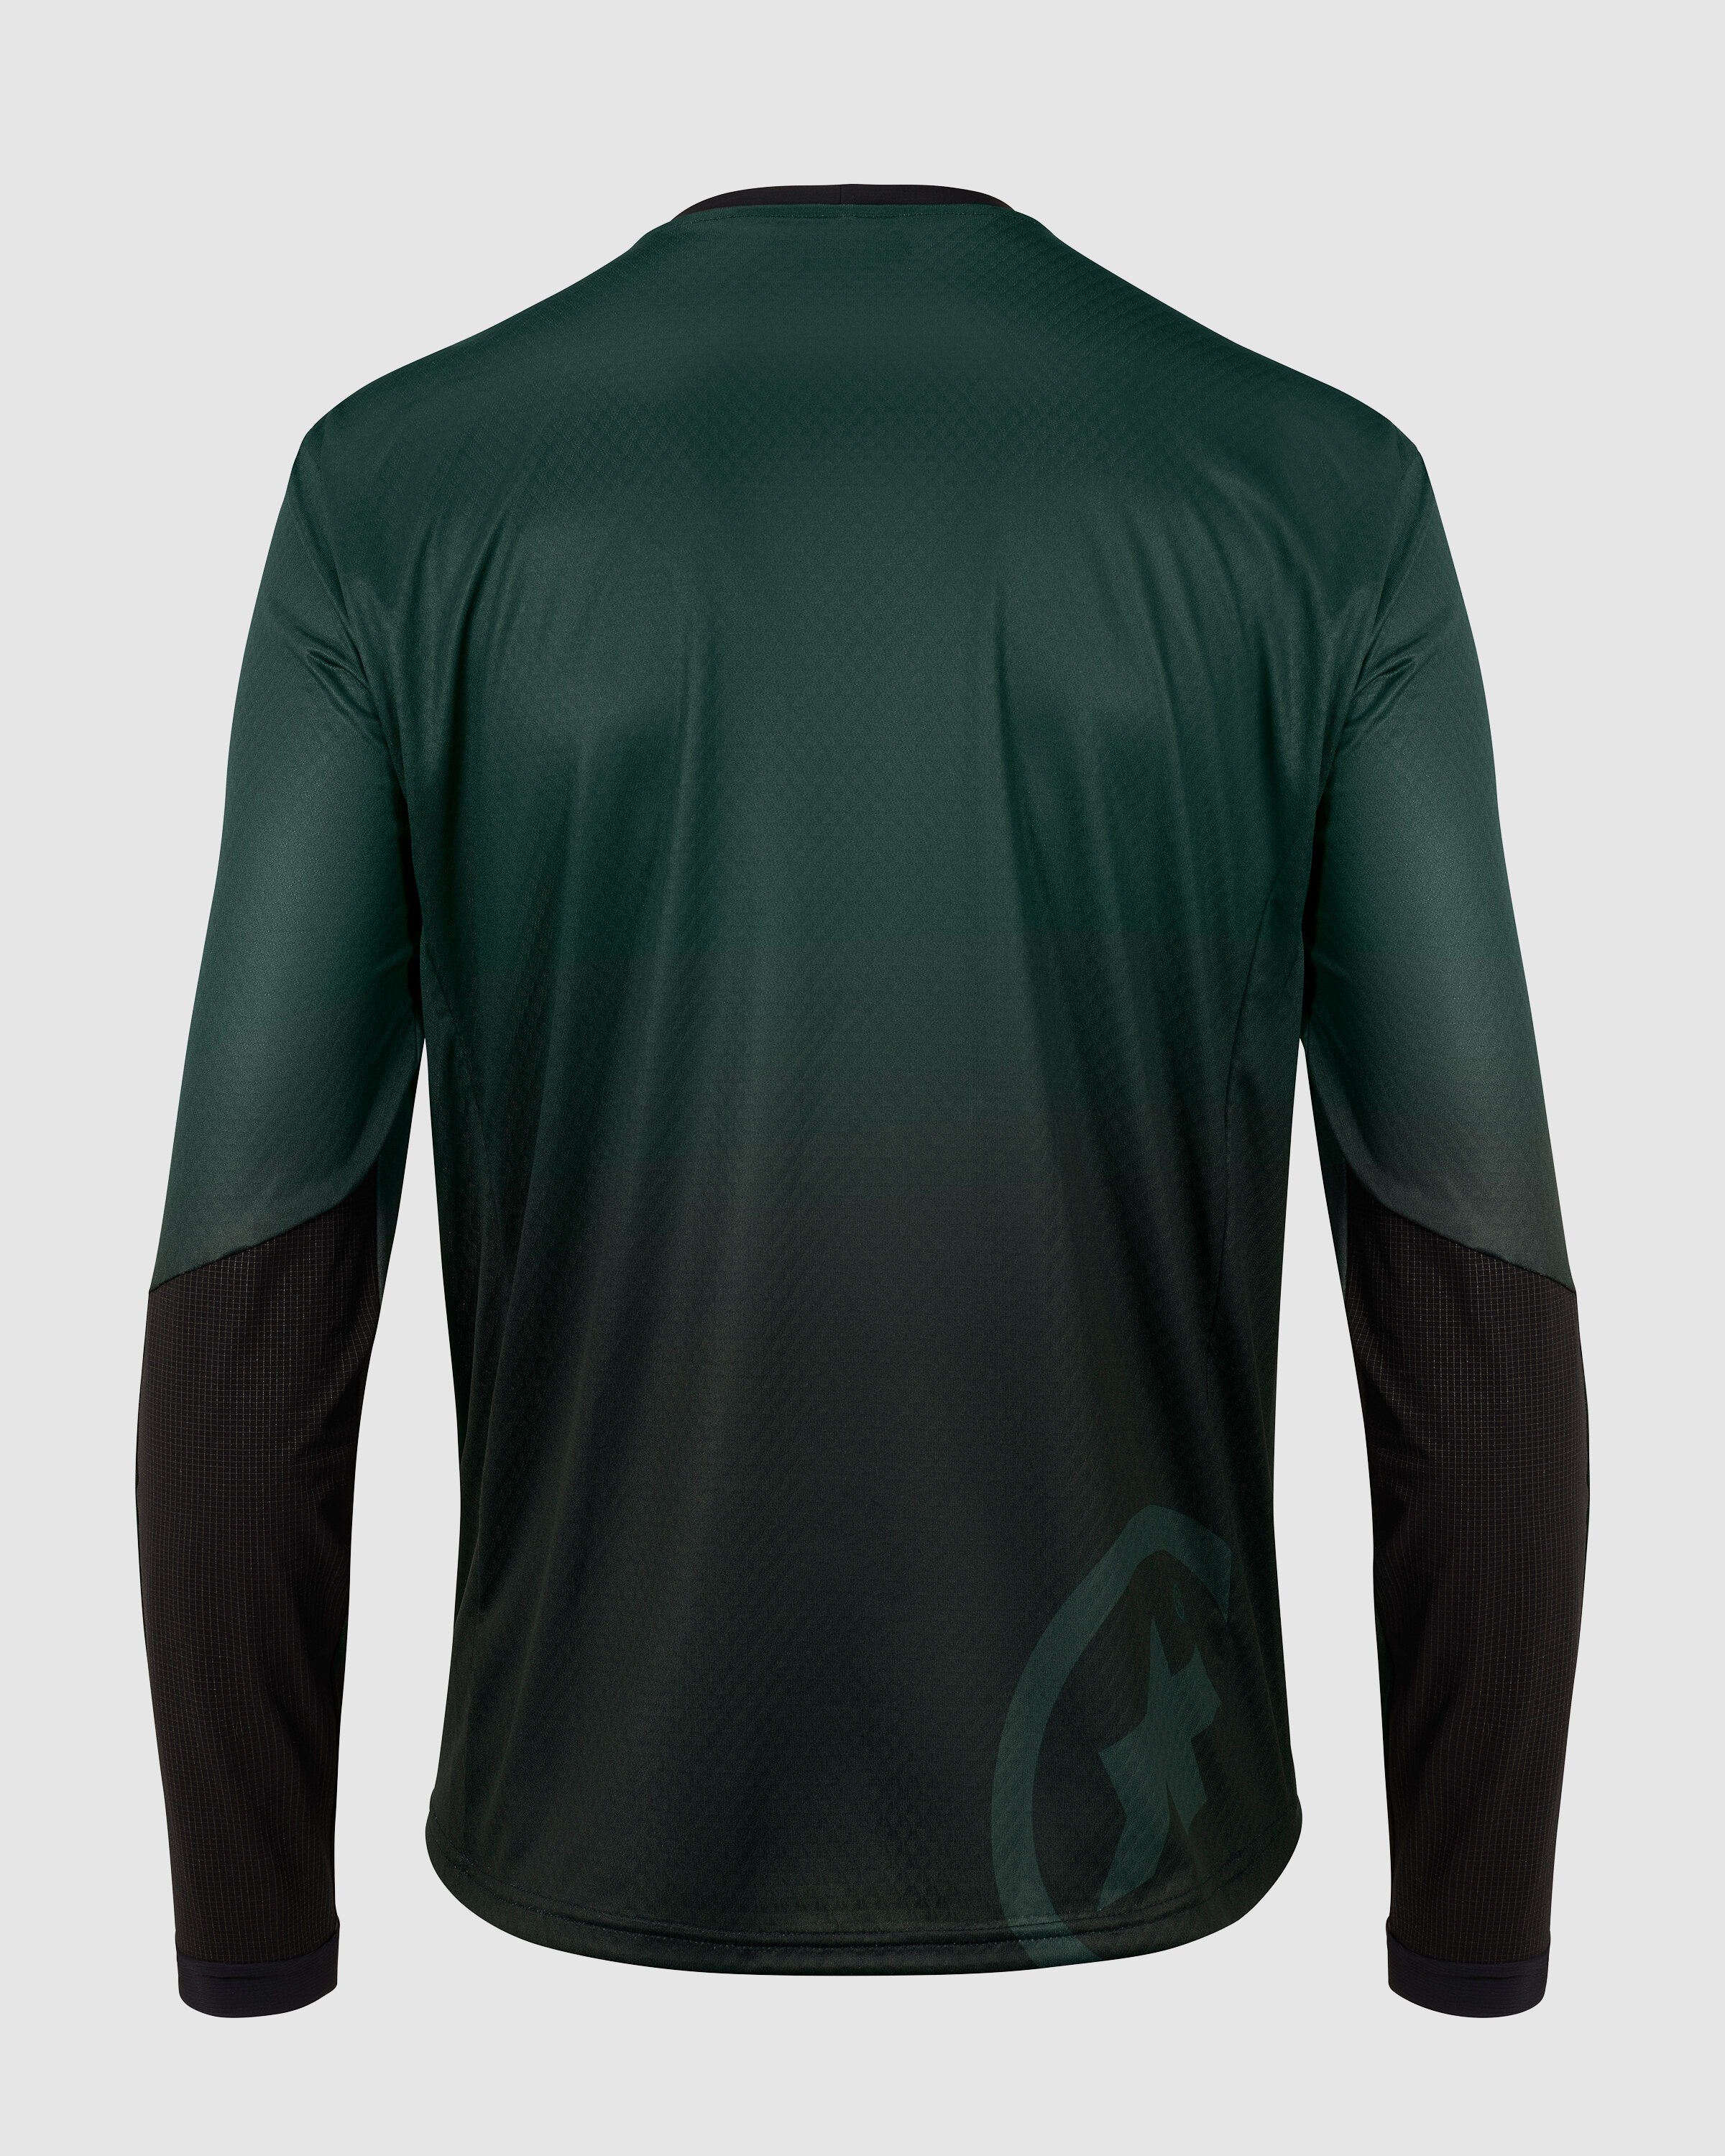 TRAIL LS Jersey T3 - ASSOS Of Switzerland - Official Outlet